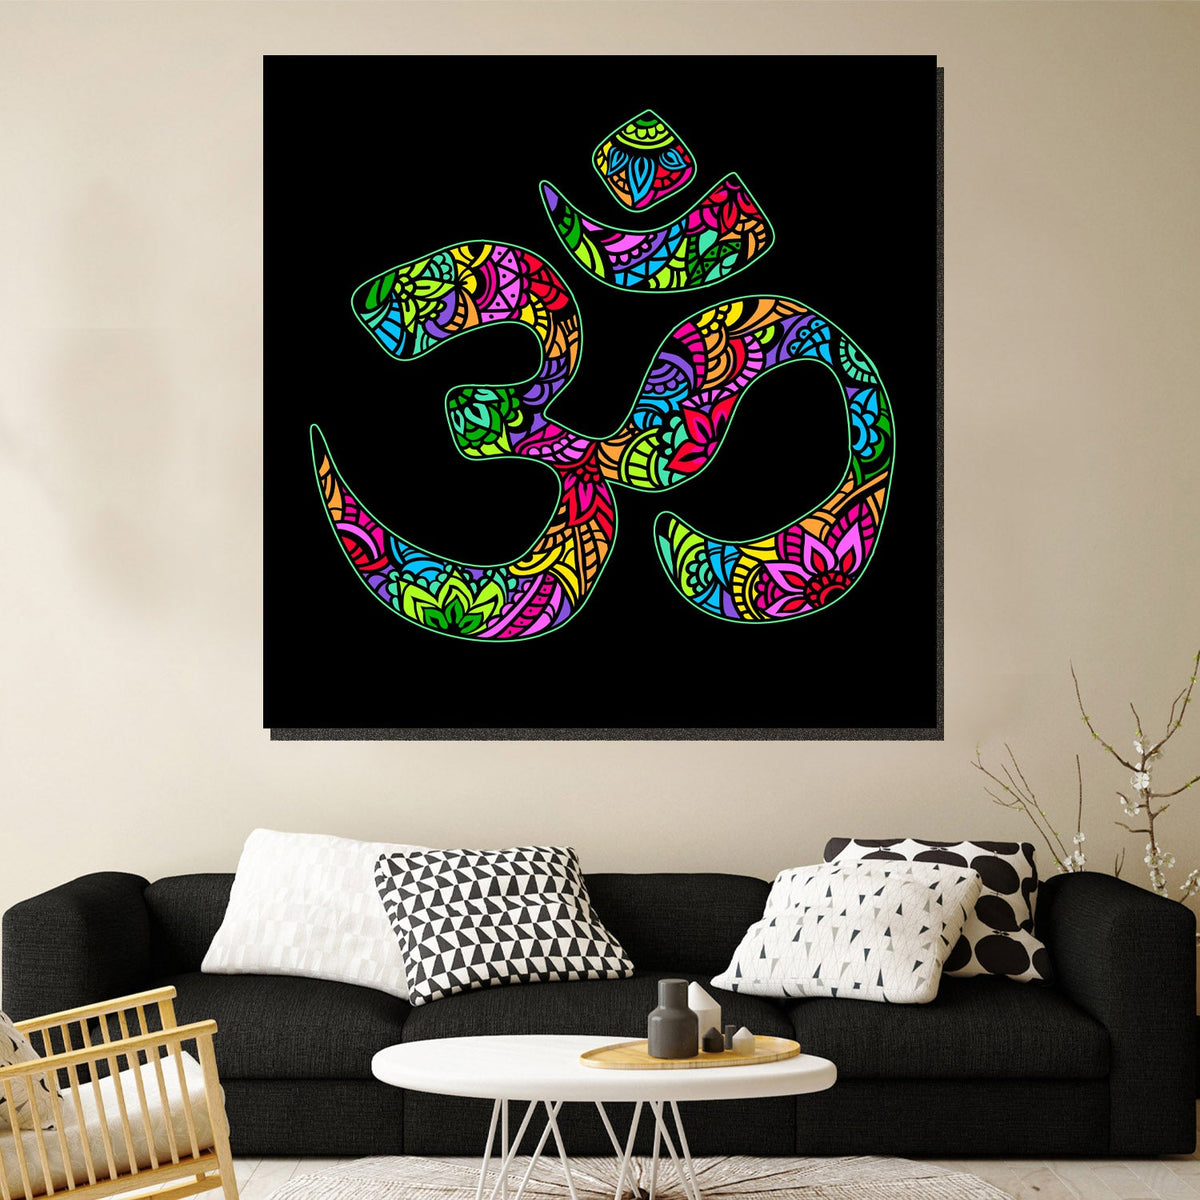 https://cdn.shopify.com/s/files/1/0387/9986/8044/products/ColourfulOmSymbolCanvasArtprintStretched-2.jpg